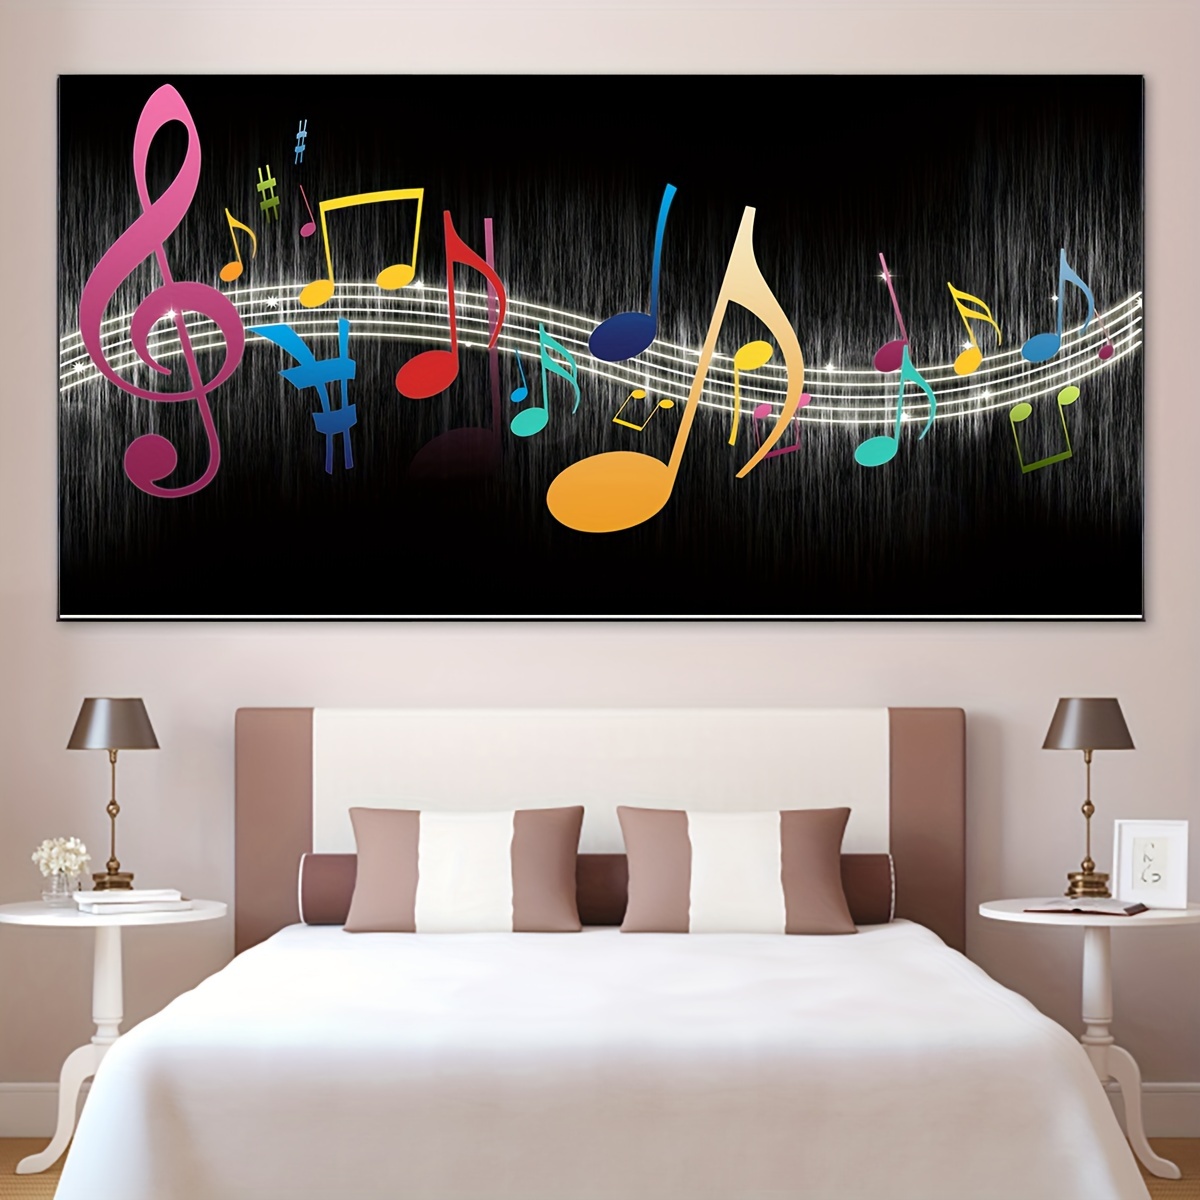 

1pc Unframed Musical Theme Canvas Print Poster, Musical Note Painting, Canvas Wall Art, Artwork Wall Painting For Bar, Cafe, Gift, Bedroom, Office, Living Room, Wall Decor, Home And Dormitory Decor